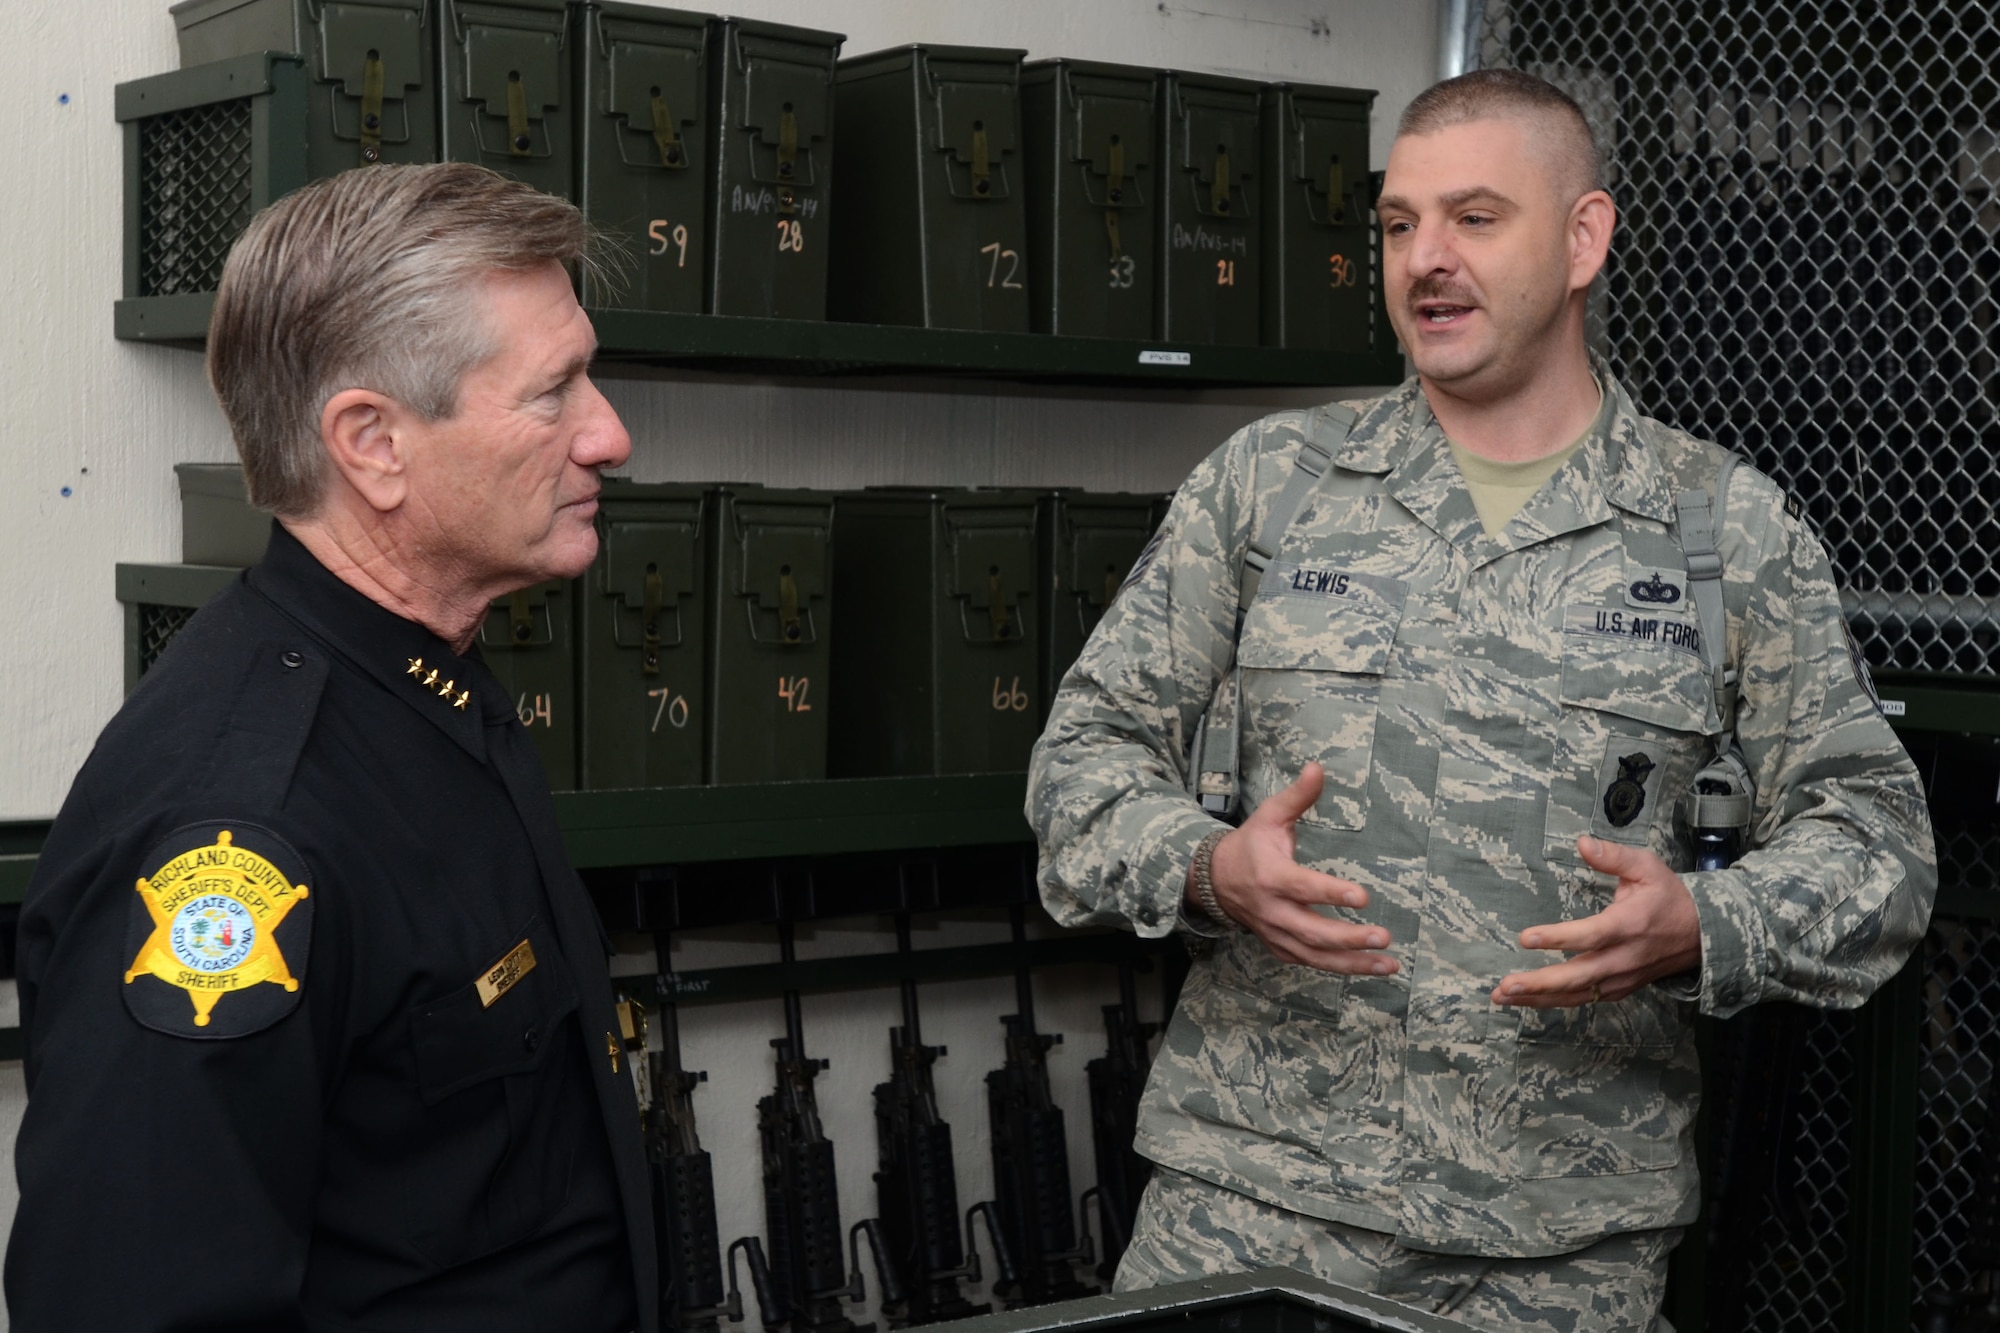 U.S. Air Force Lt. Col. Paul Laymon, the Defense Force Commander for the 169th Security Forces Squadron, and Staff Sgt. Kenvyn Lewis, combat arms trainer for the 169th SFS, give Sheriff Leon Lott, from the Richland County Sheriff's Department, a tour of the unit's armory and weapons arsenal. Sheriff Lott received the title as "Honorary Defense Force Commander" for the South Carolina Air National Guard's 169th Security Forces Squadron during a ceremony held at McEntire Joint National Guard Base, S.C., Nov. 1, 2014. This honor recognized Sheriff Lott as a community leader and supporter of the South Carolina Air National Guard to strengthen community relationships and share in team building training and experience. (U.S. Air National Guard photo by Senior Master Sgt. Edward Snyder/Released)